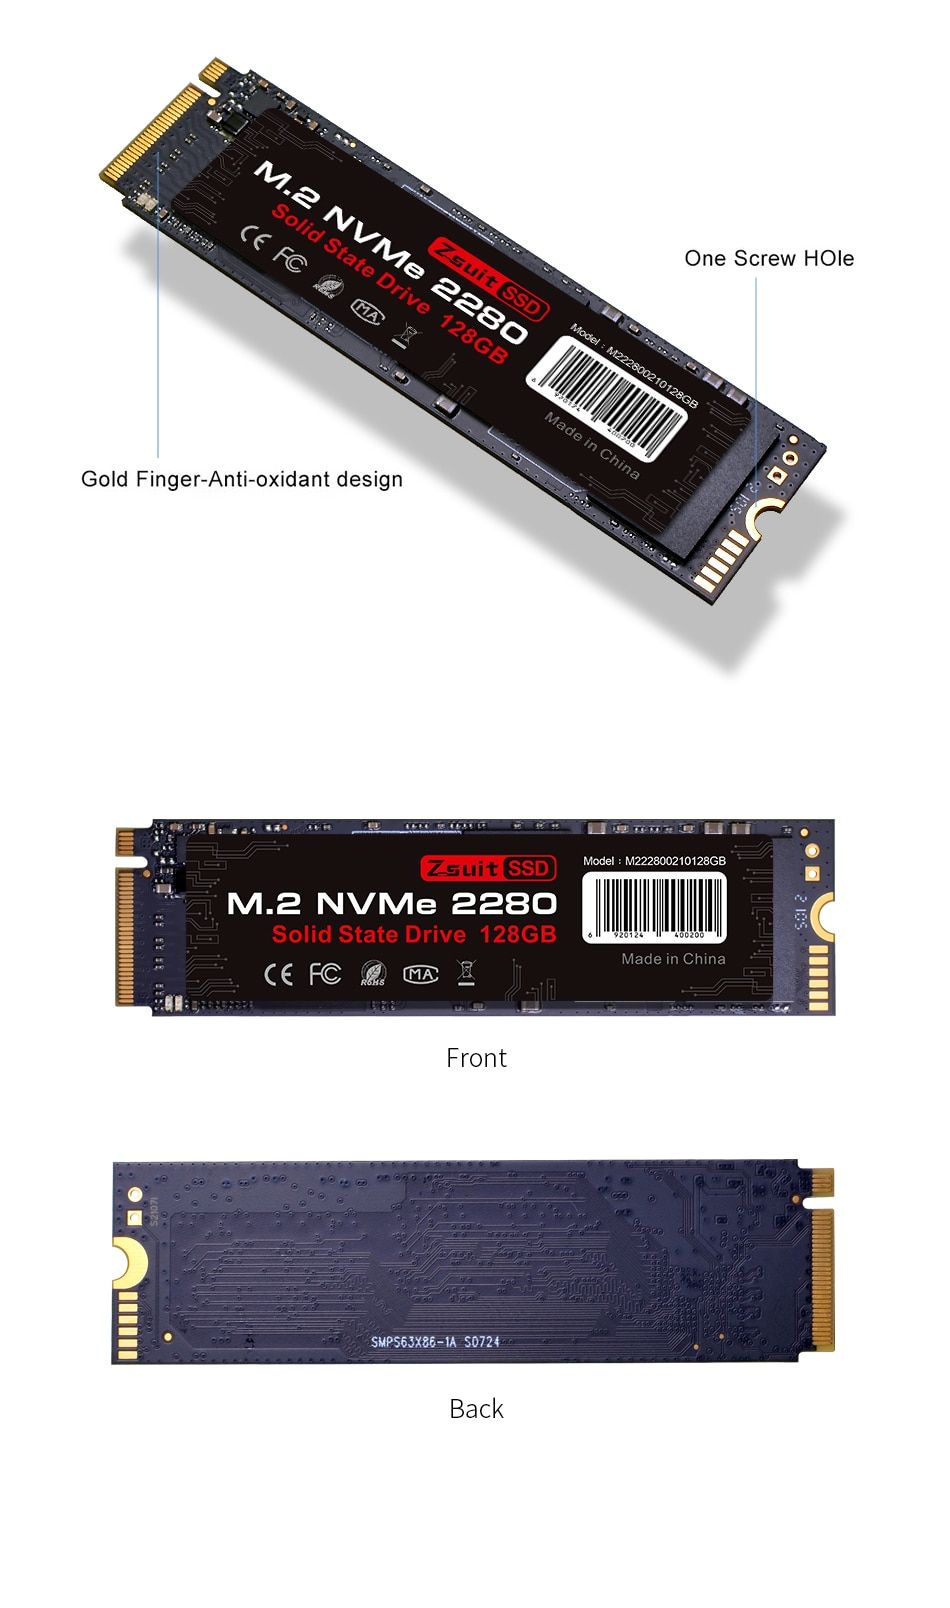 Hard Drive Disk Nvme M2 Ssd 512gb 1tb High Speed Nmve M2 Ssd Drive Pcie 30 2280 Solid State 9917